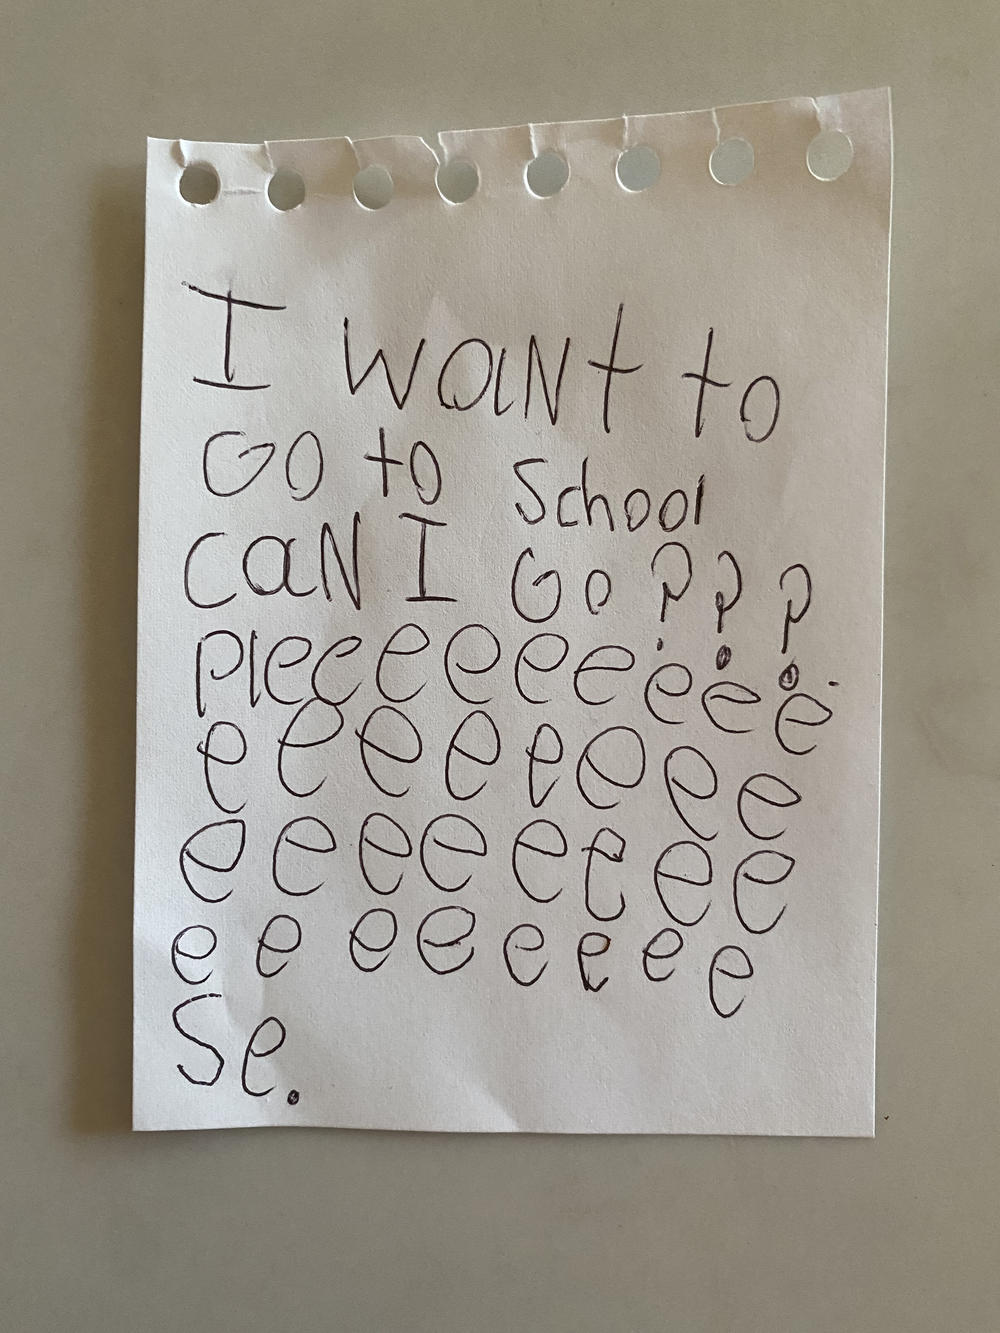 The note that Caroline Tung Richmond's daughter gave her mom asking if she could please go to in-person school.